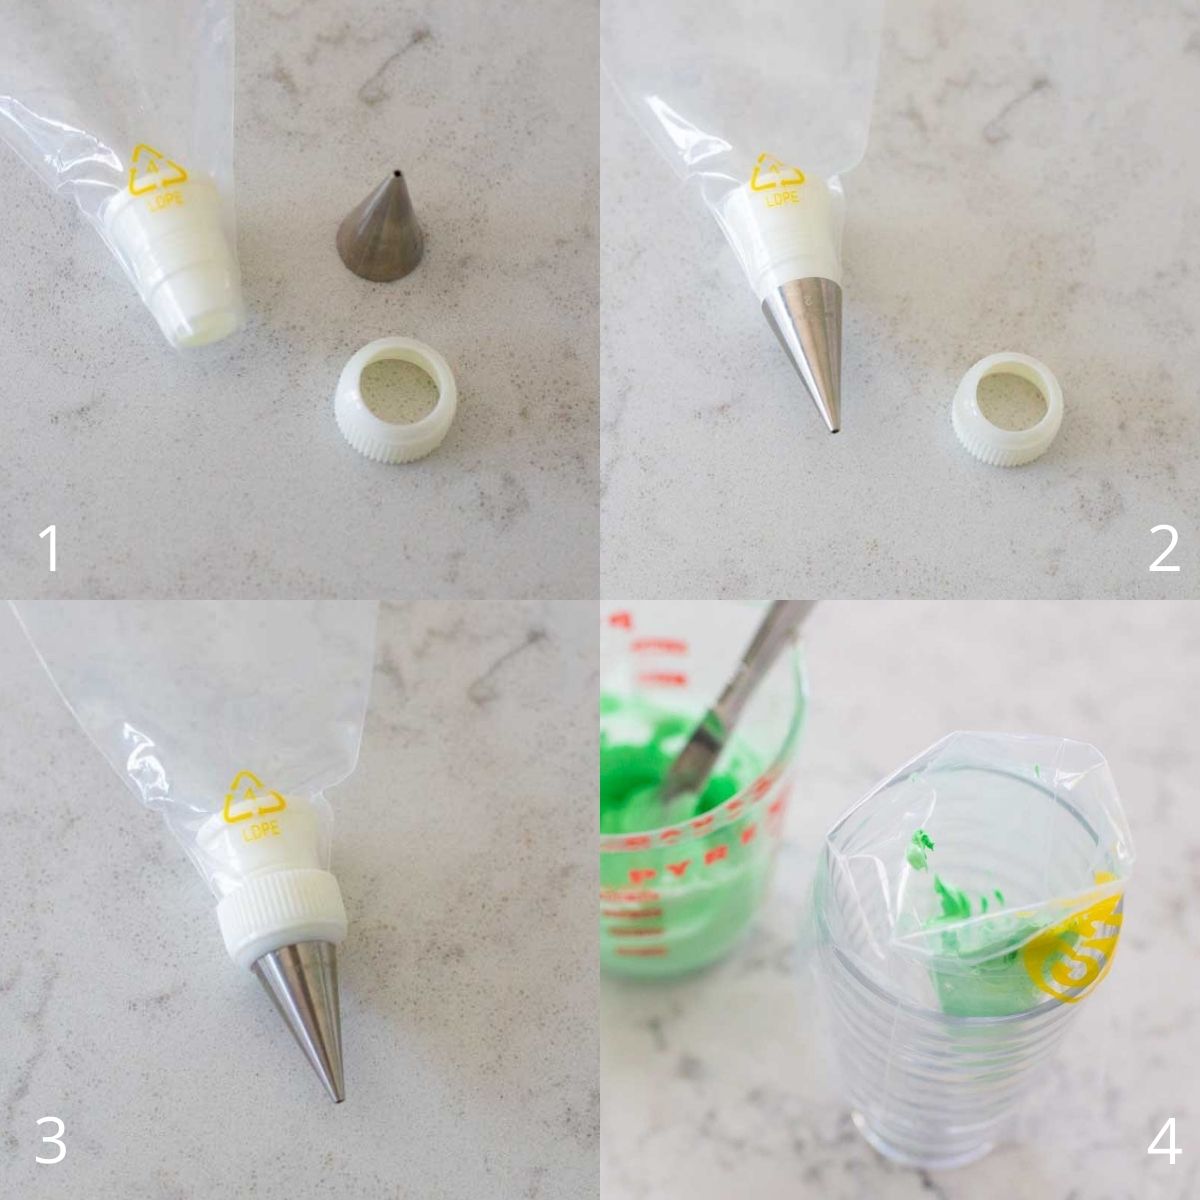 Step by step photo collage shows how to make piping icing and fill a piping bag.